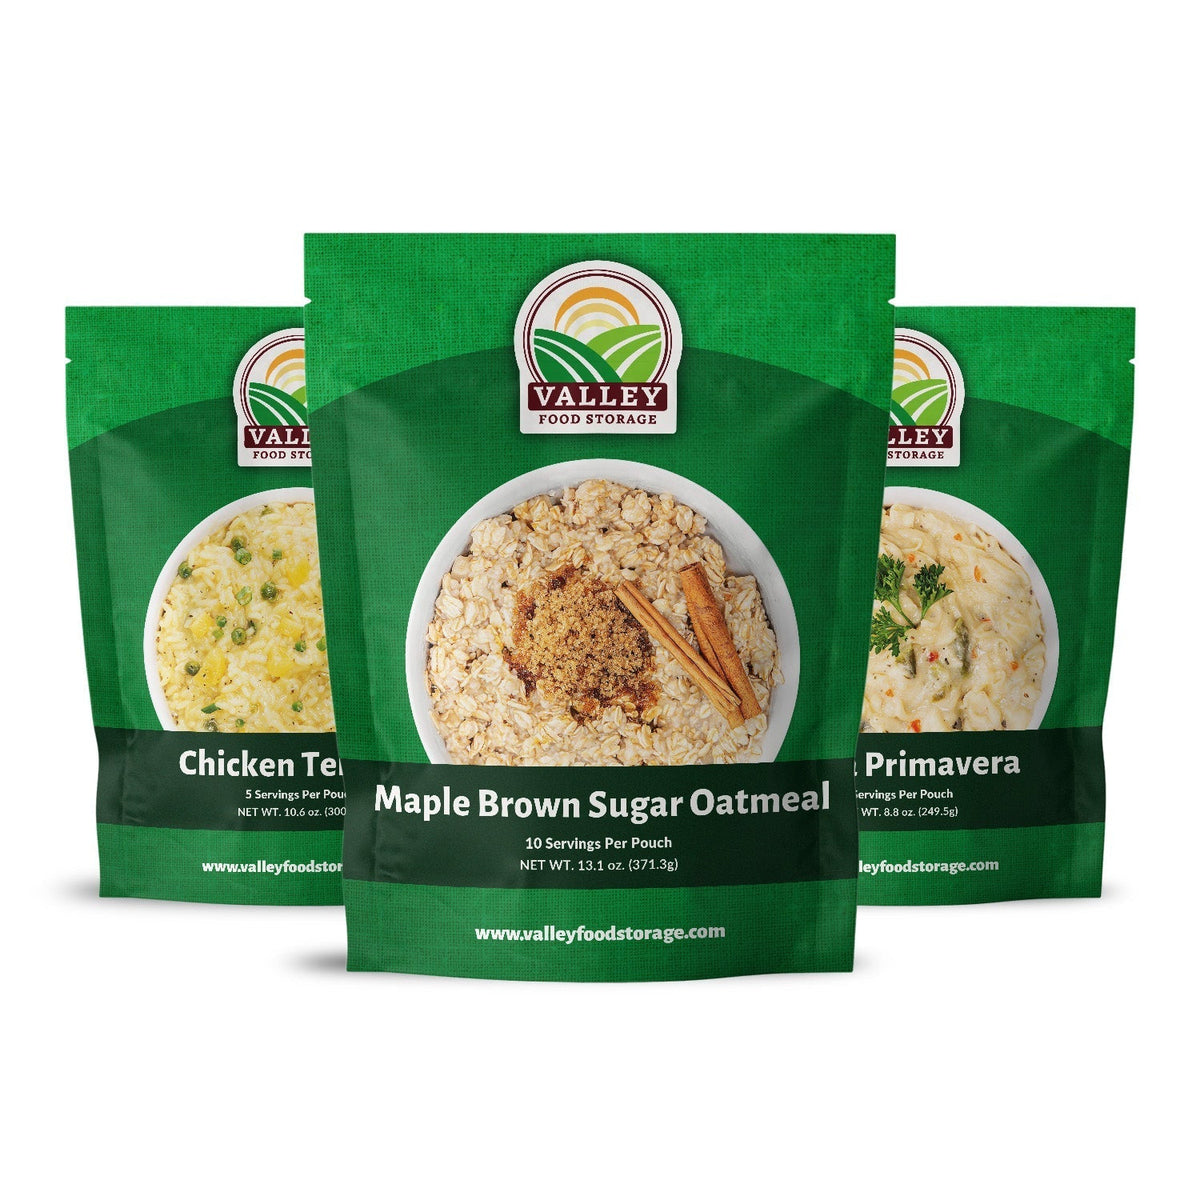 Breakfast Lunch Dinner Variety 3-pack From Valley Food Storage